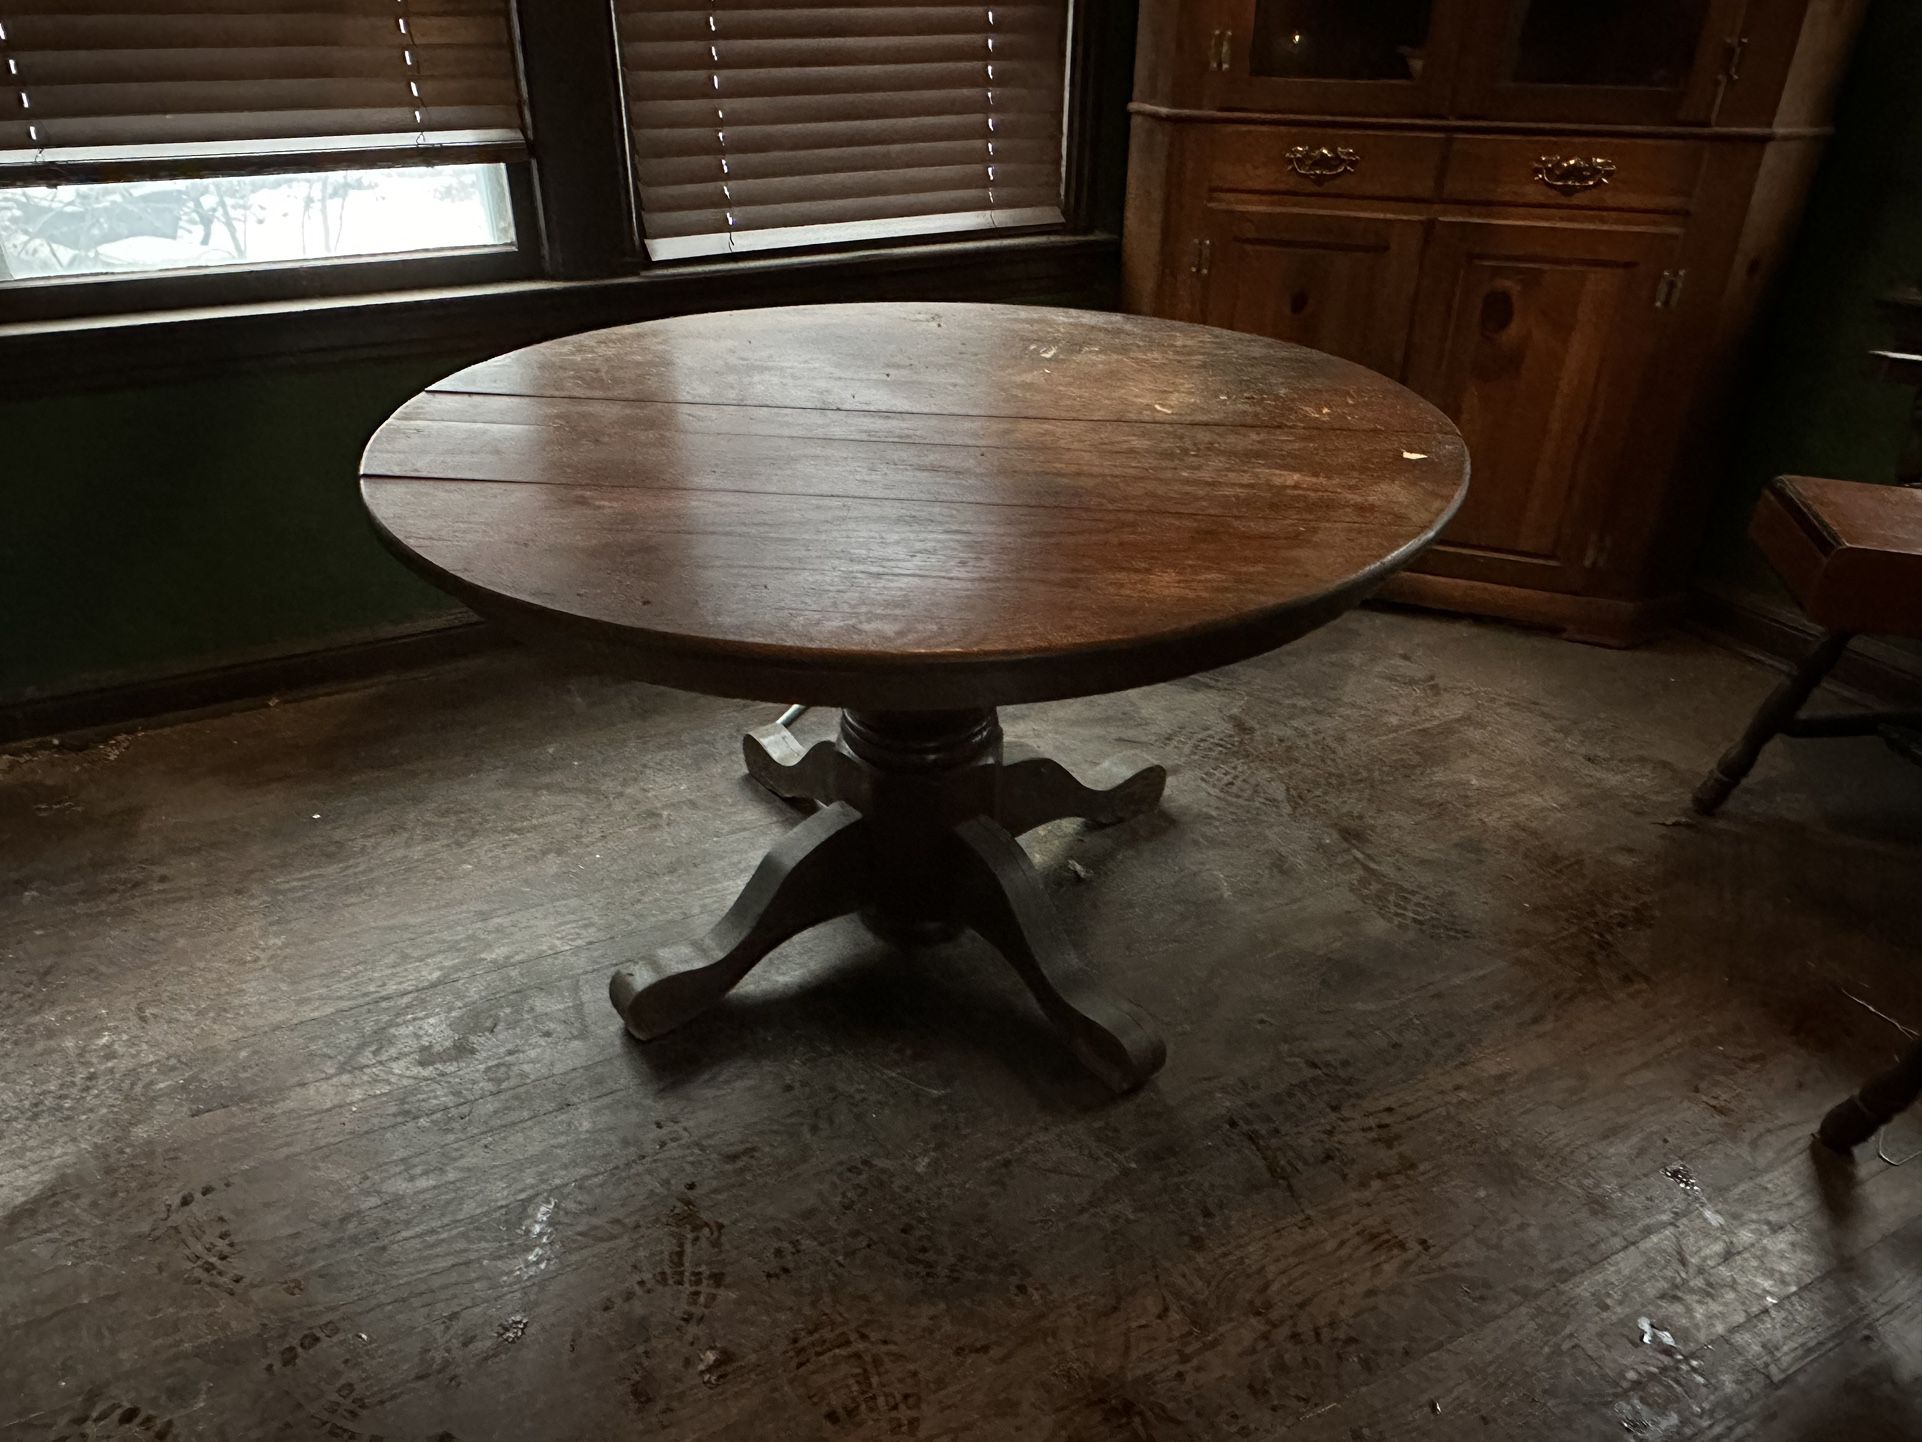 Antique Wood Table and chairs 